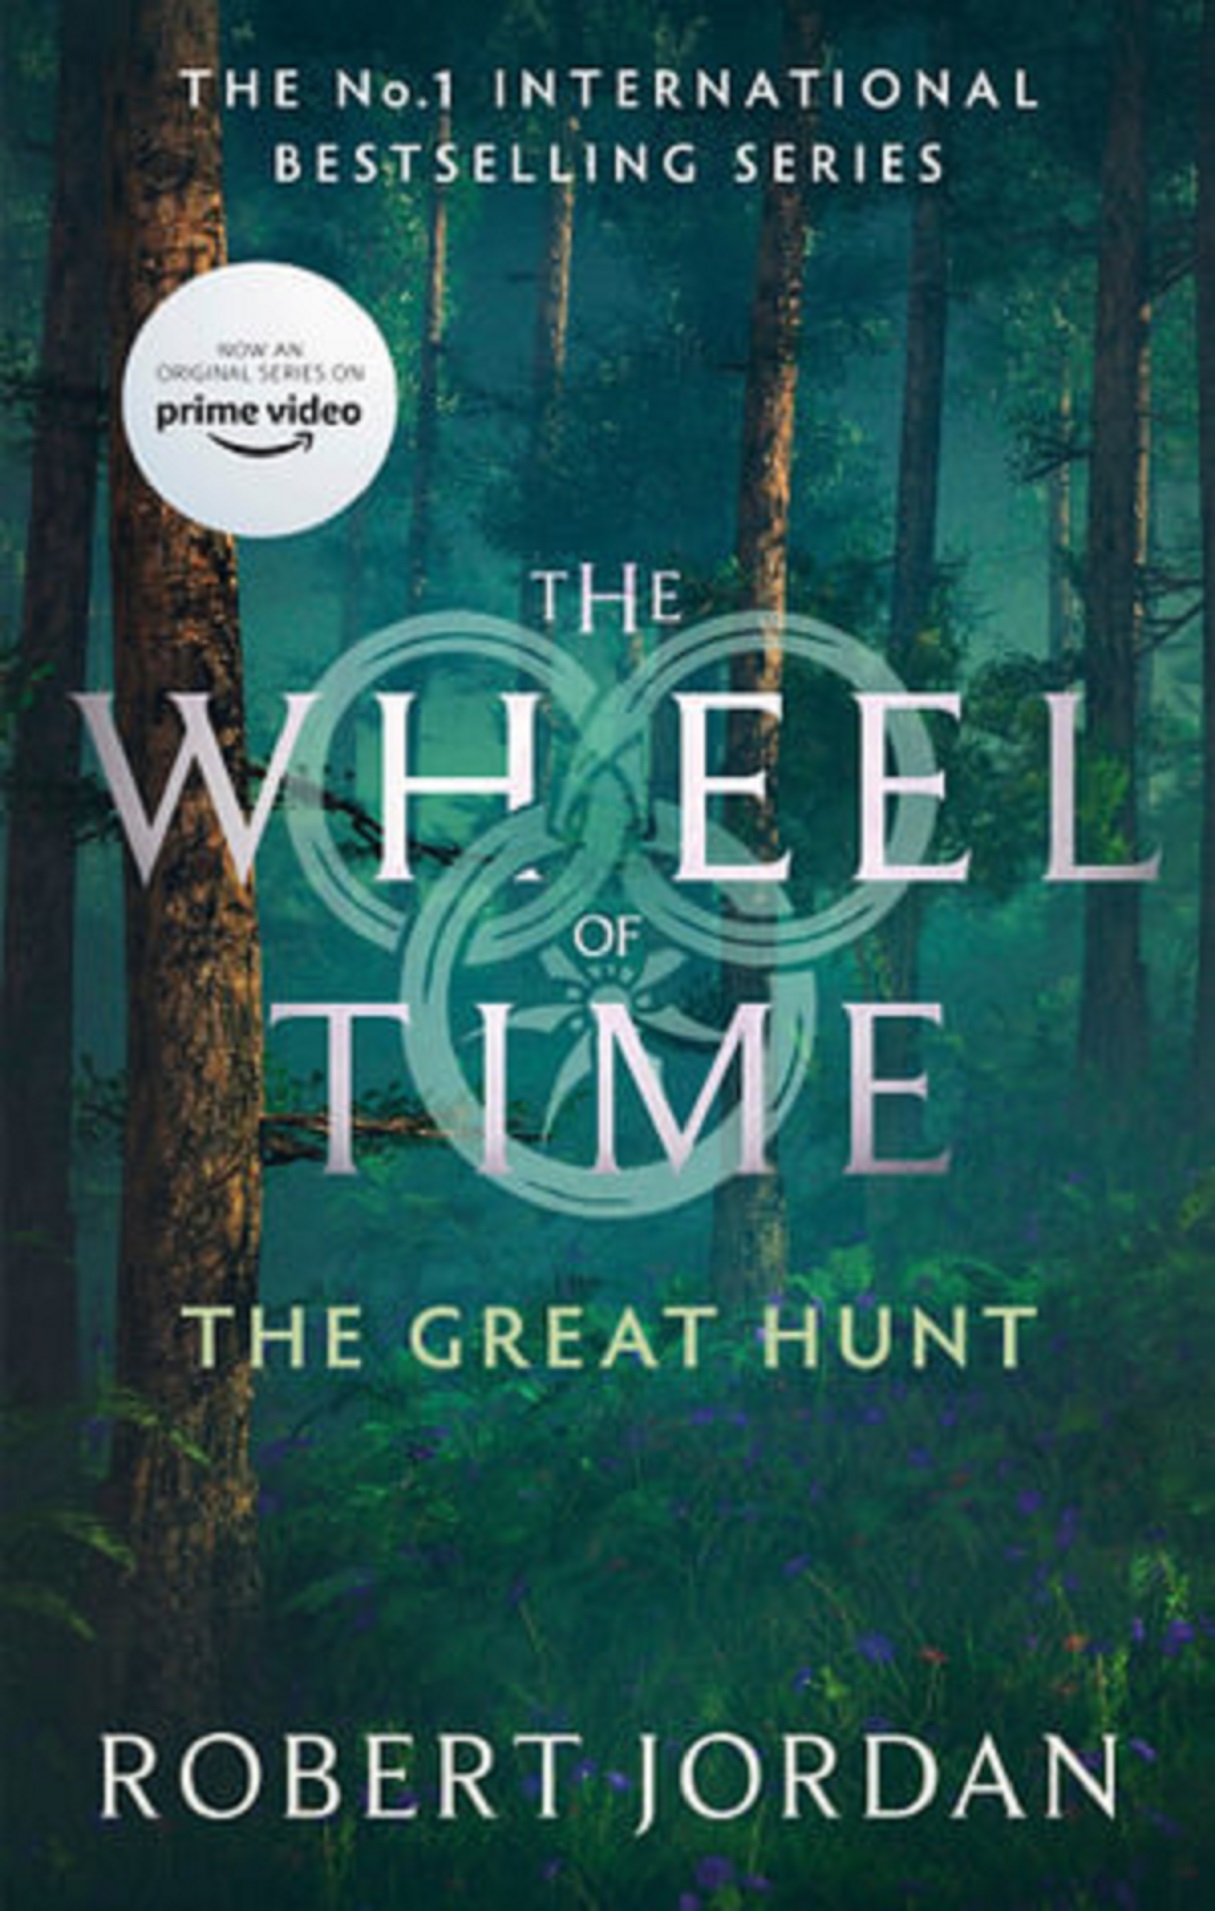 The Great Hunt - The Wheel of Time, Book 2